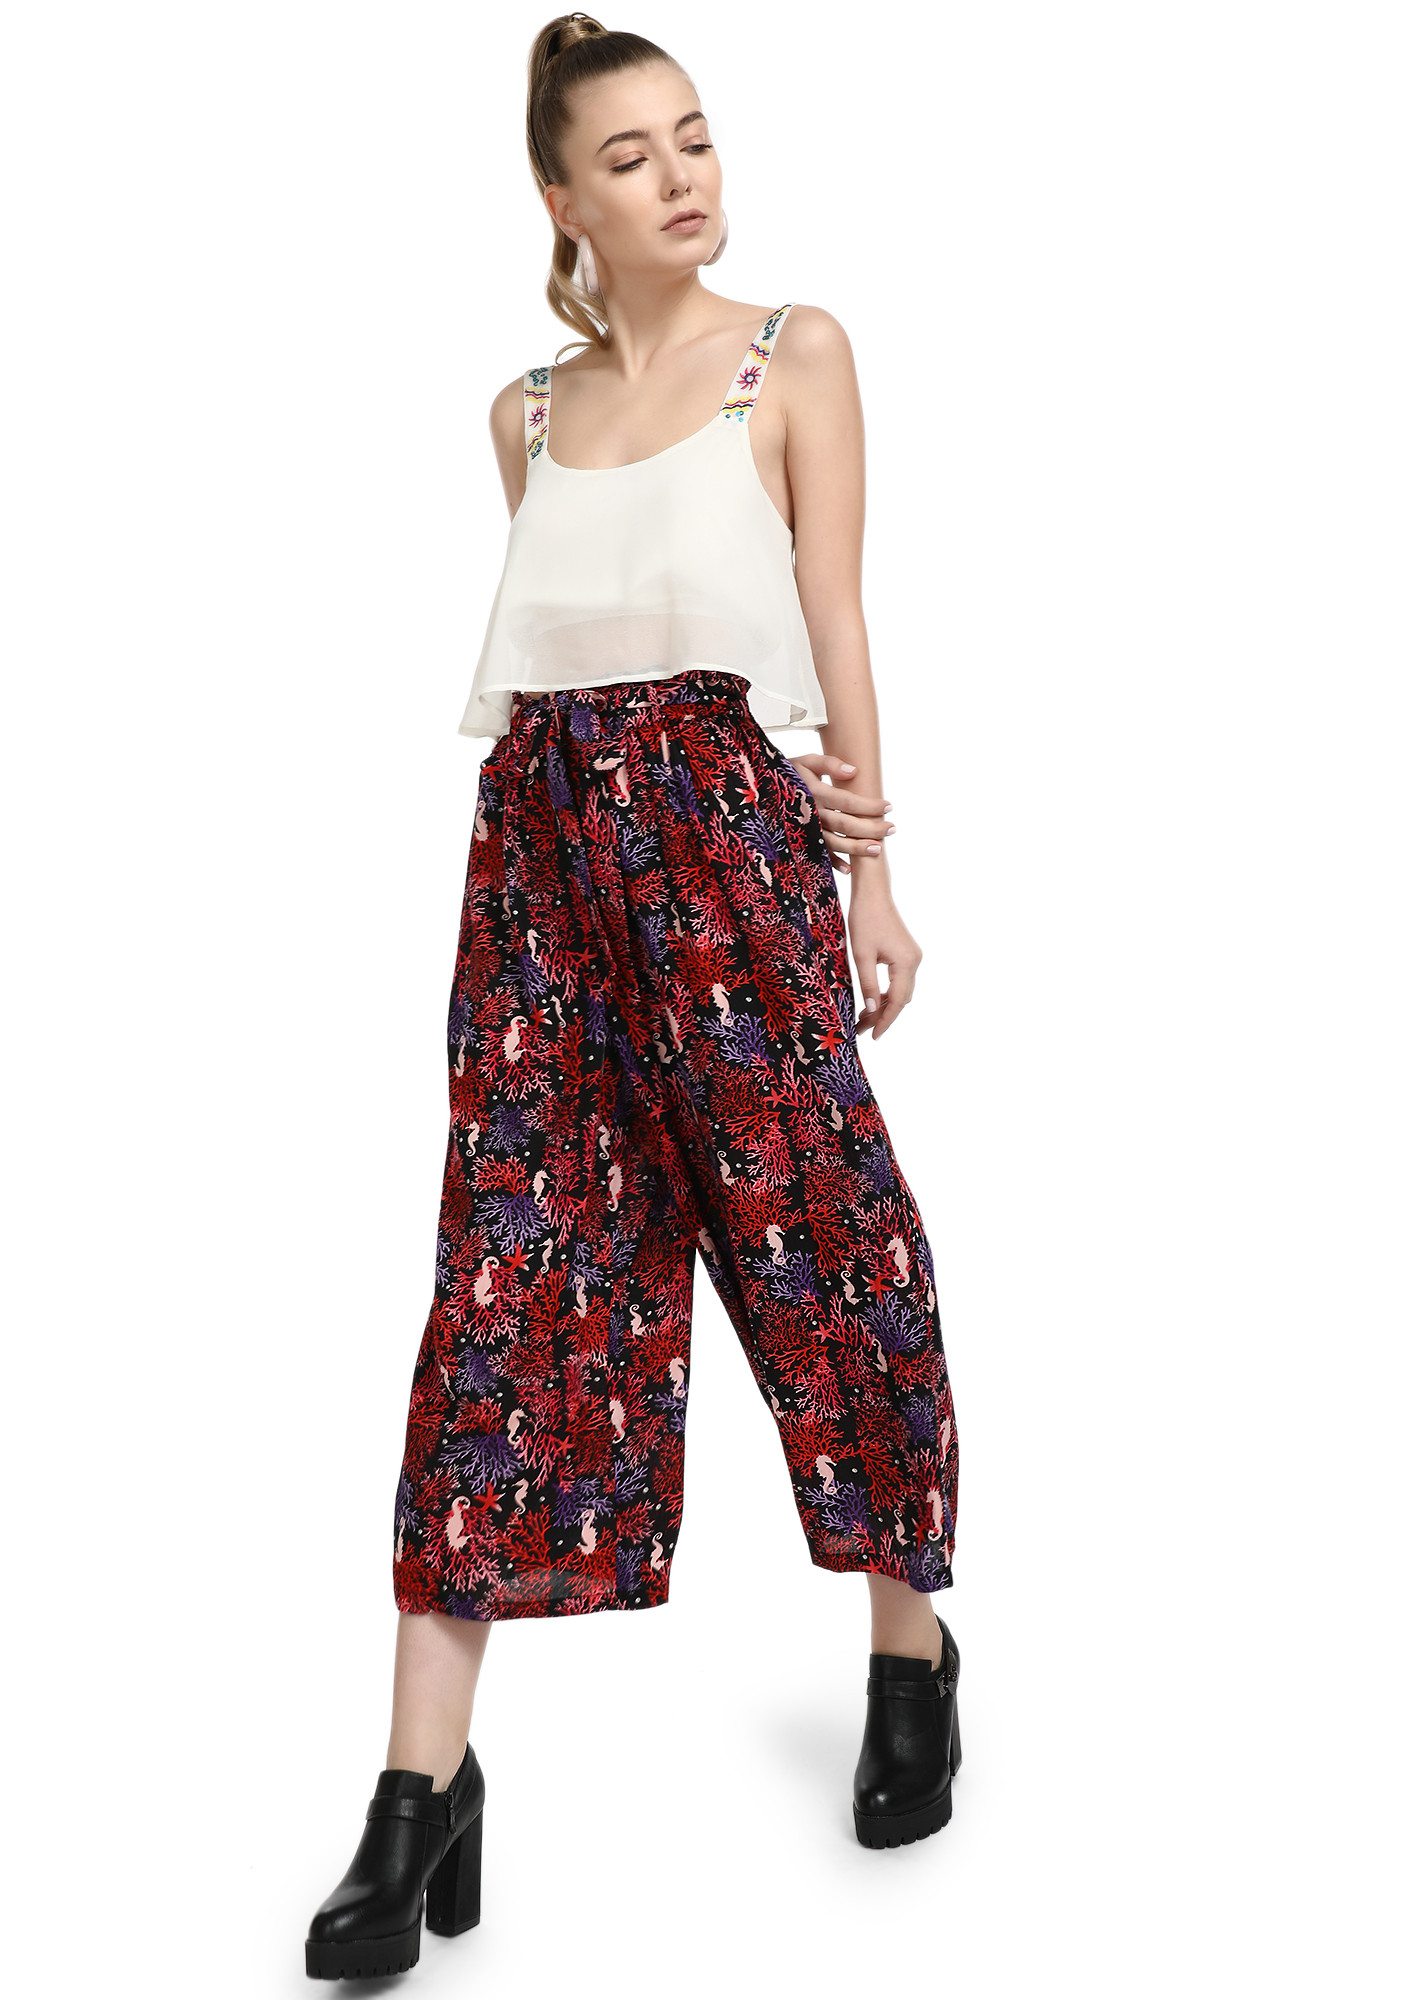 ABSTRACT FRAME OF MIND RED CULOTTES